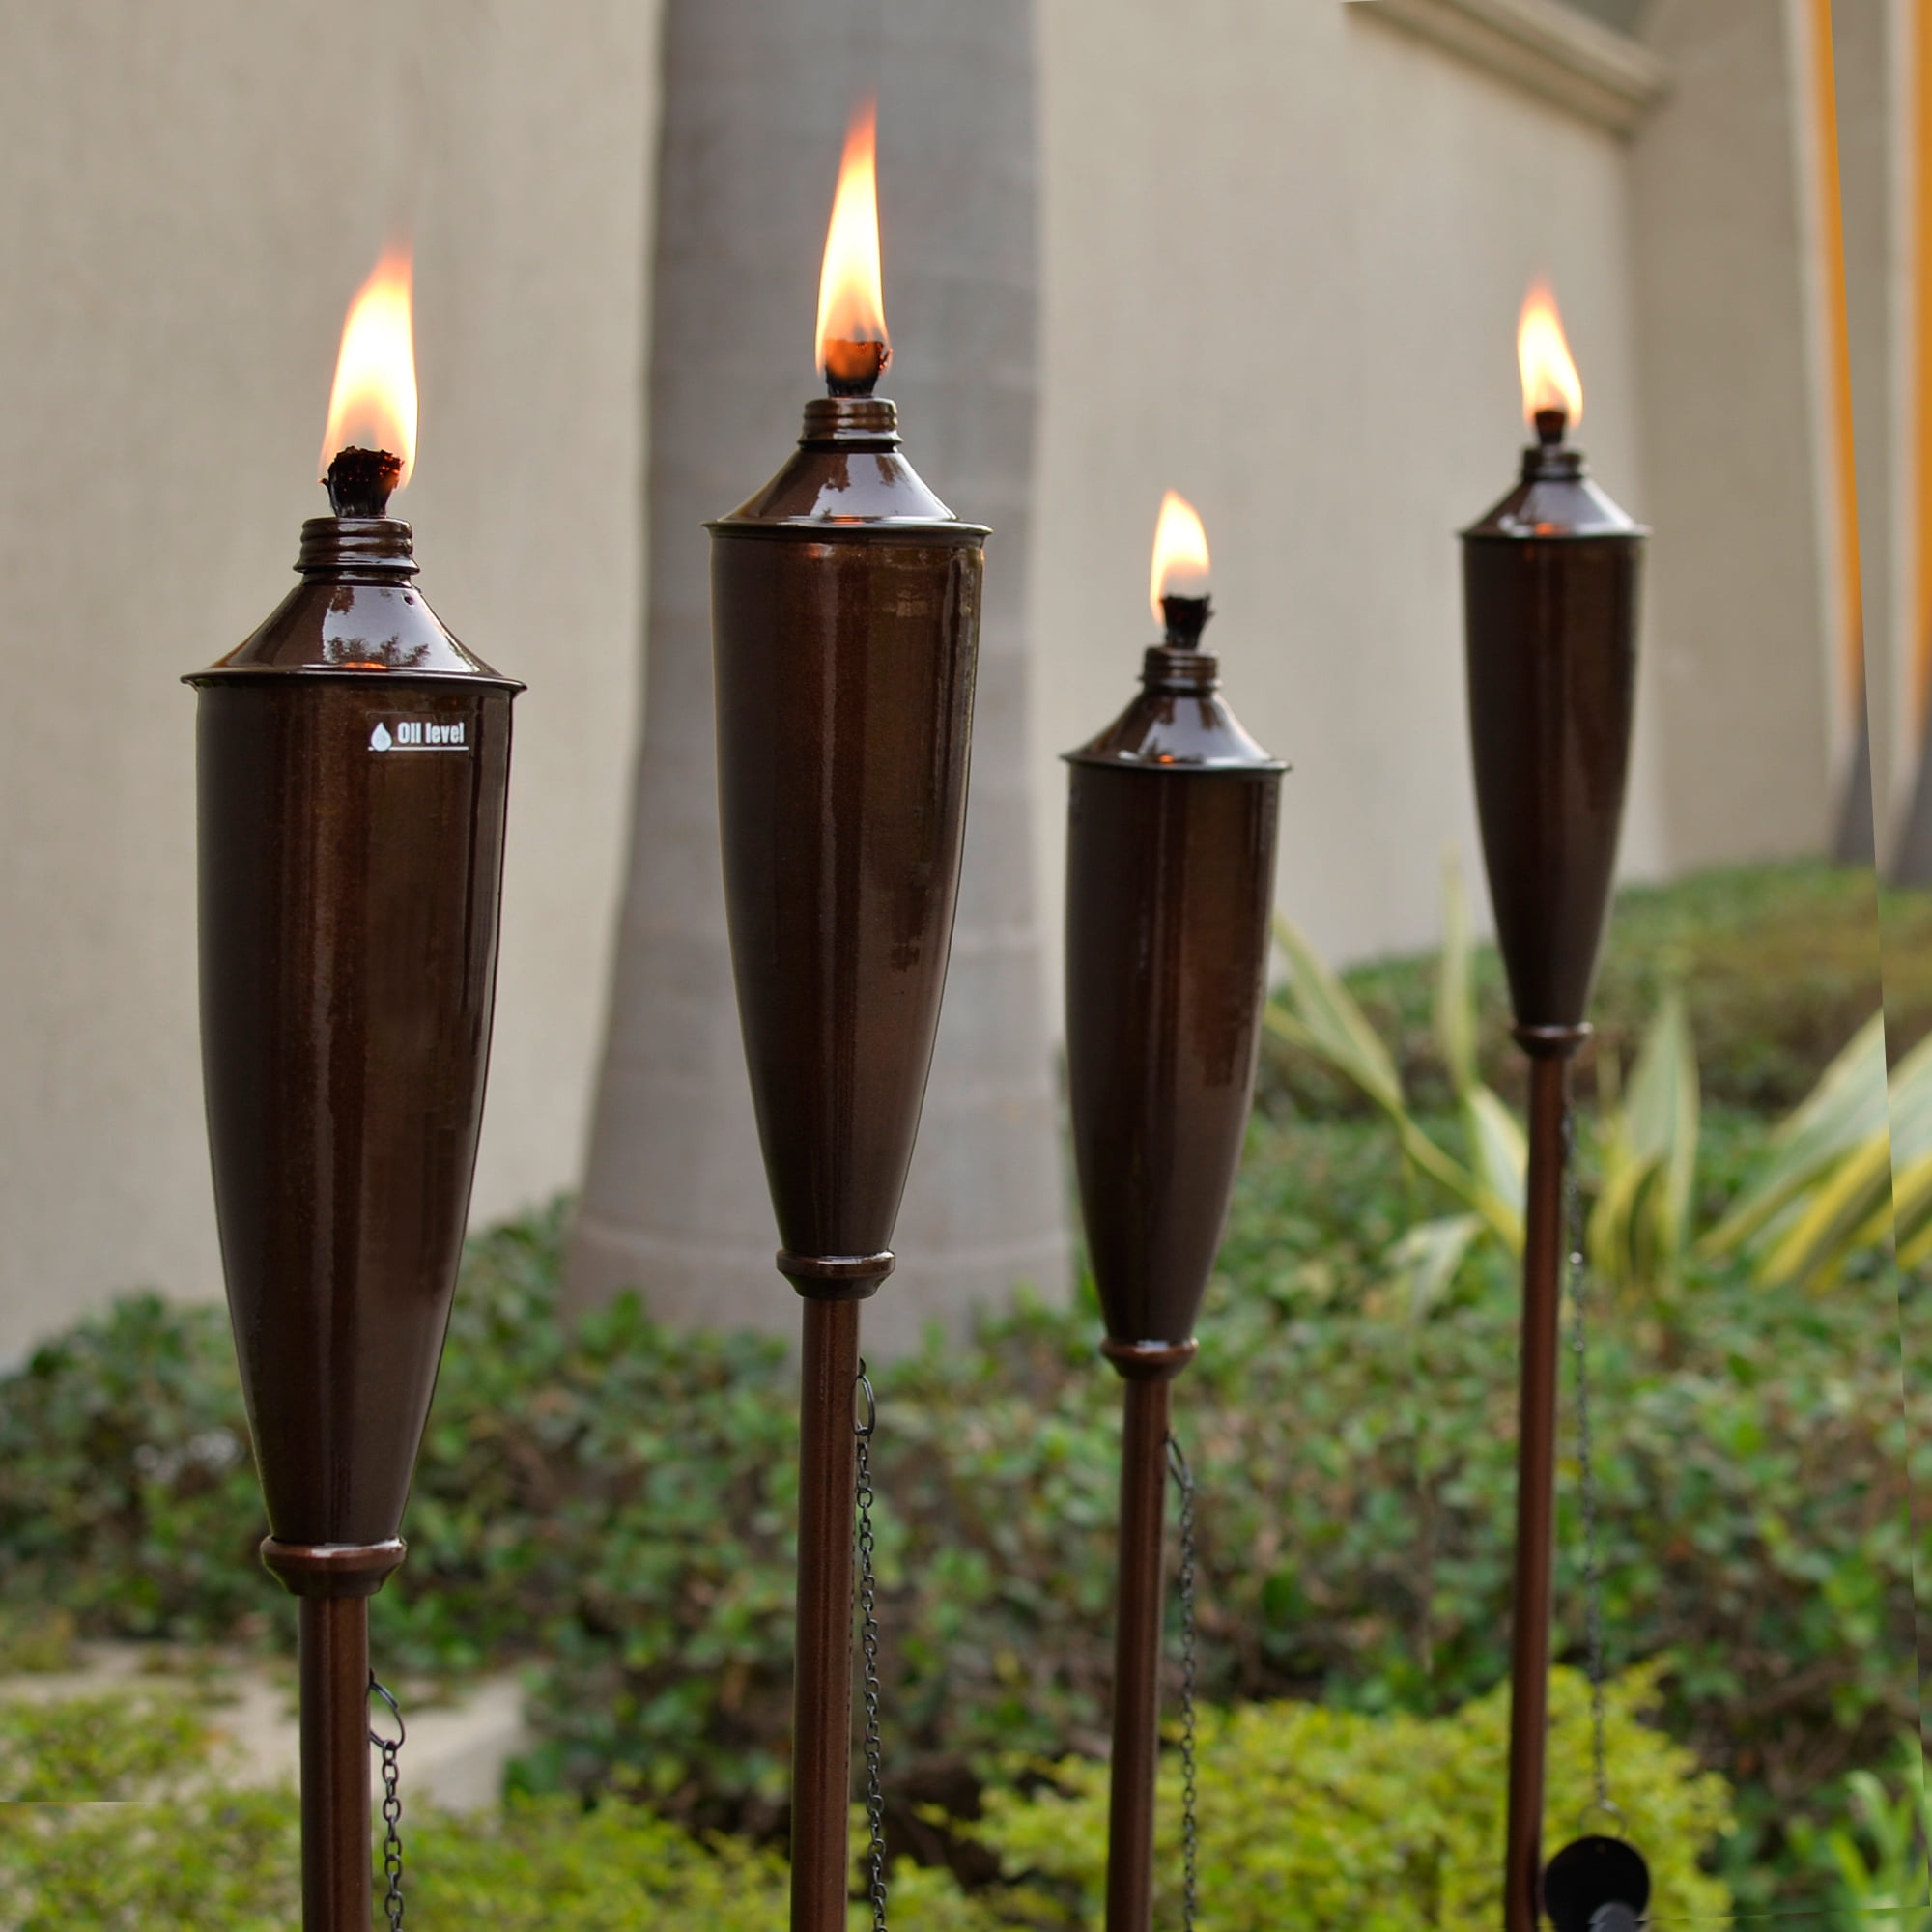 Better Homes & Garden Outdoor Tabletop Copper Bowl Torch Decorative Torch Includes Snuffer Long-Lasting Fiberglass Wick